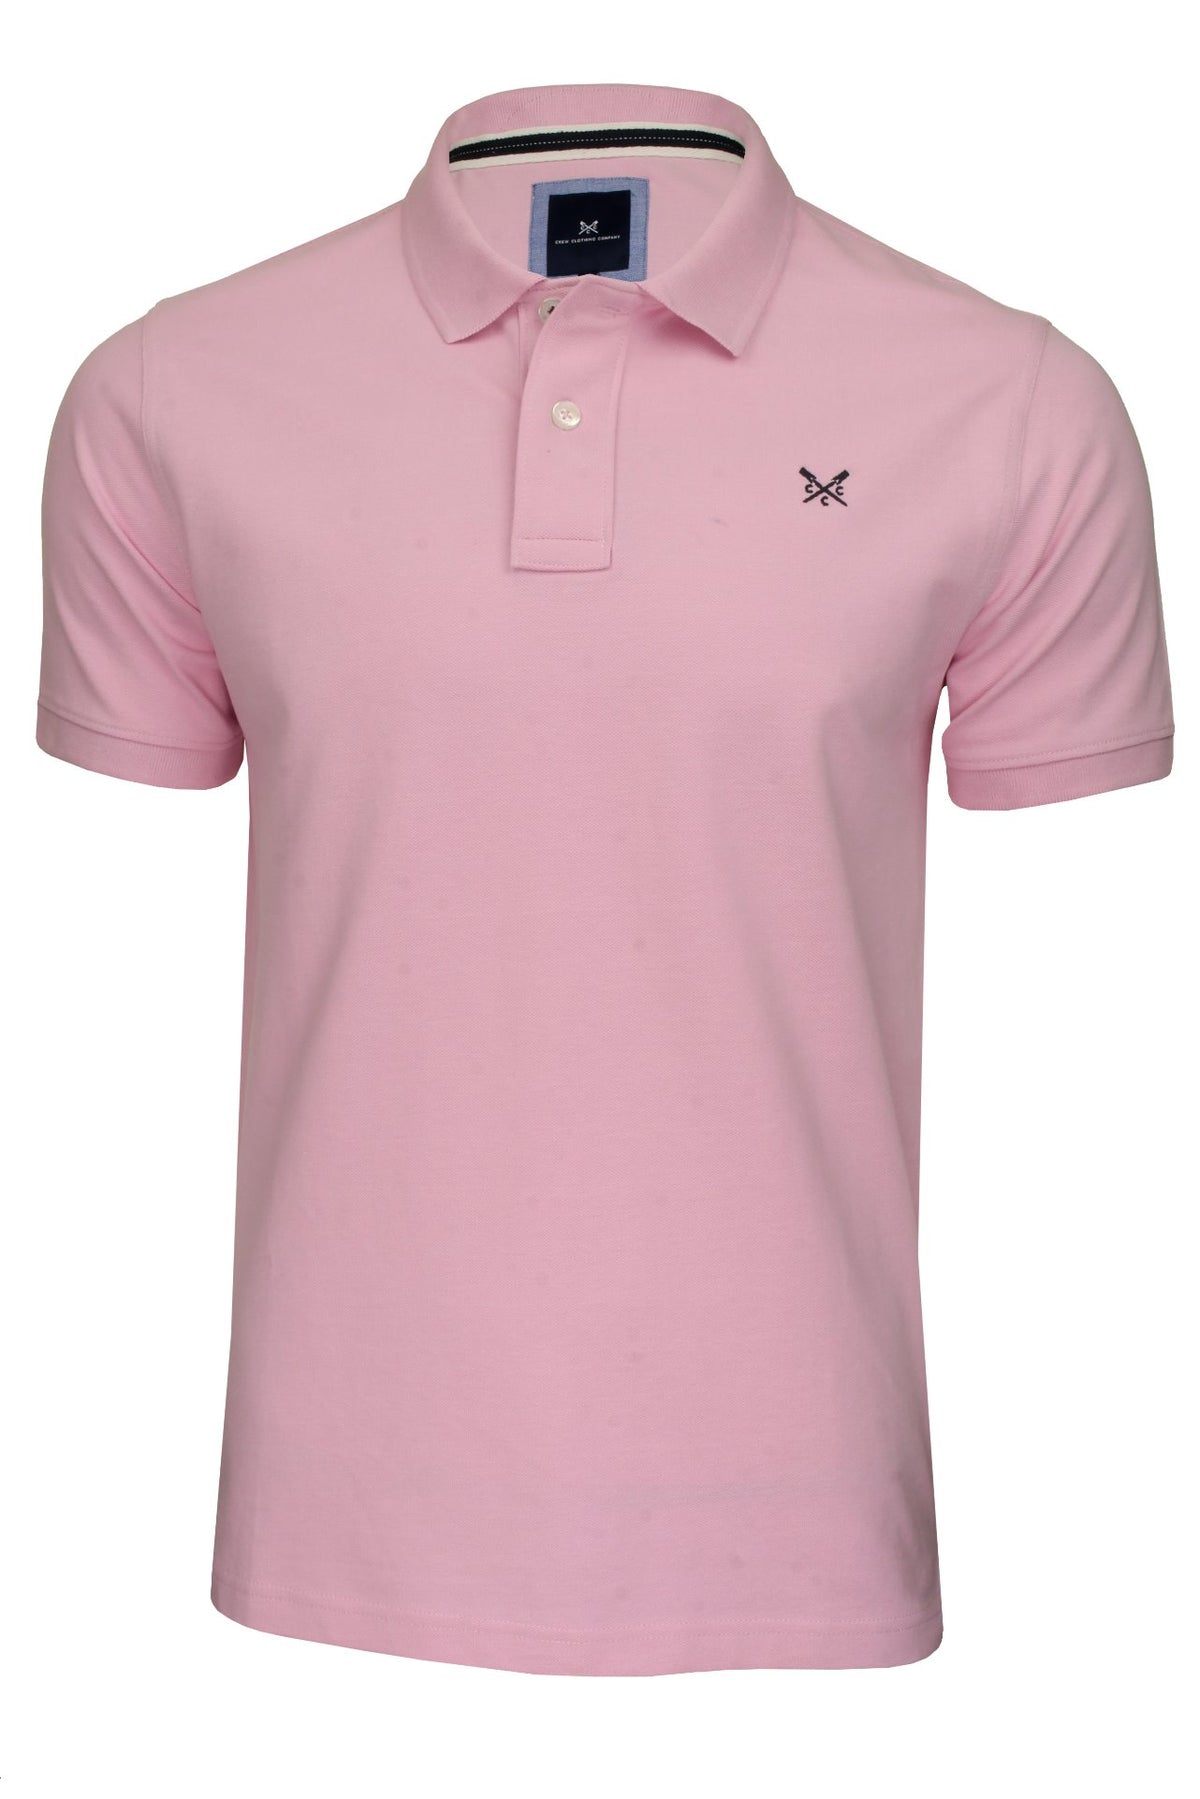 Crew Clothing Mens Pique Polo Shirt 'Classic Pique Polo' - Short Sleeved, 01, Mke002, Classic Pink